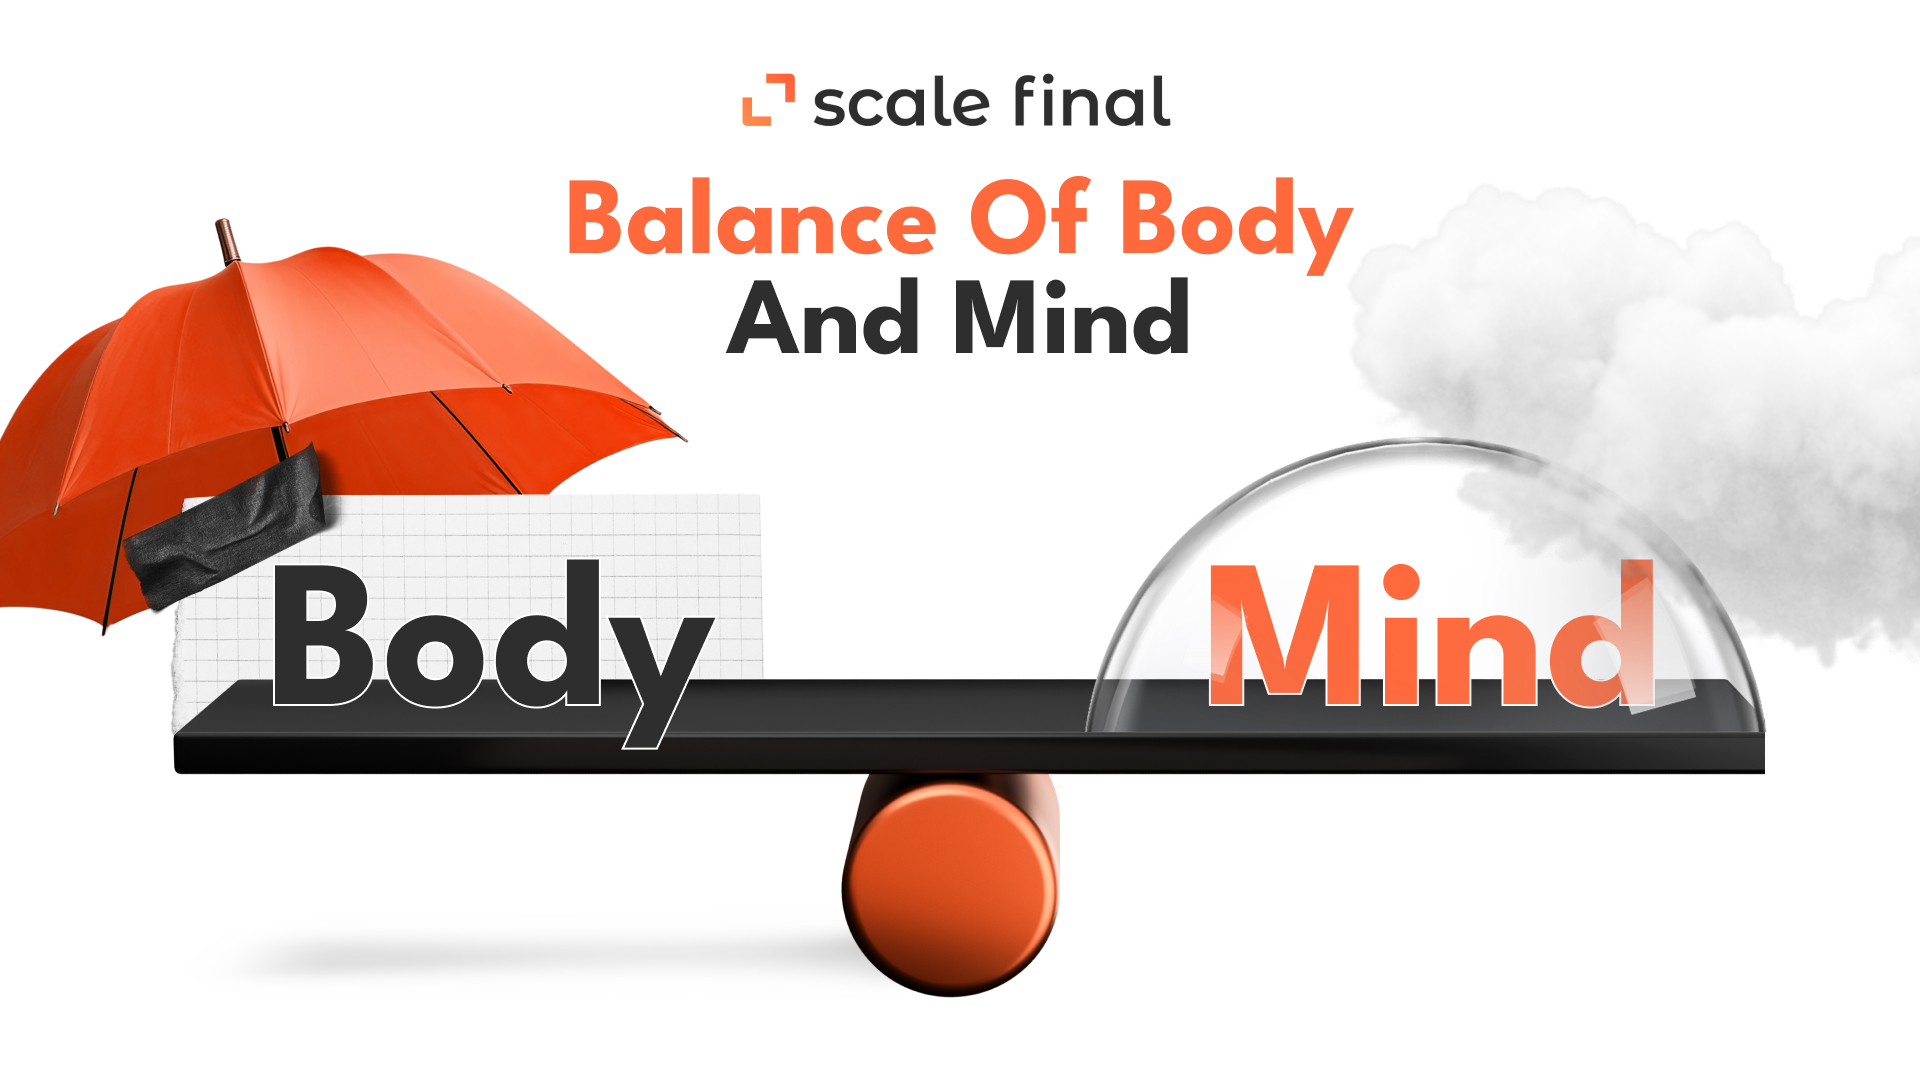 Balance of Body and Mind: Corporate and Personal Perspectives